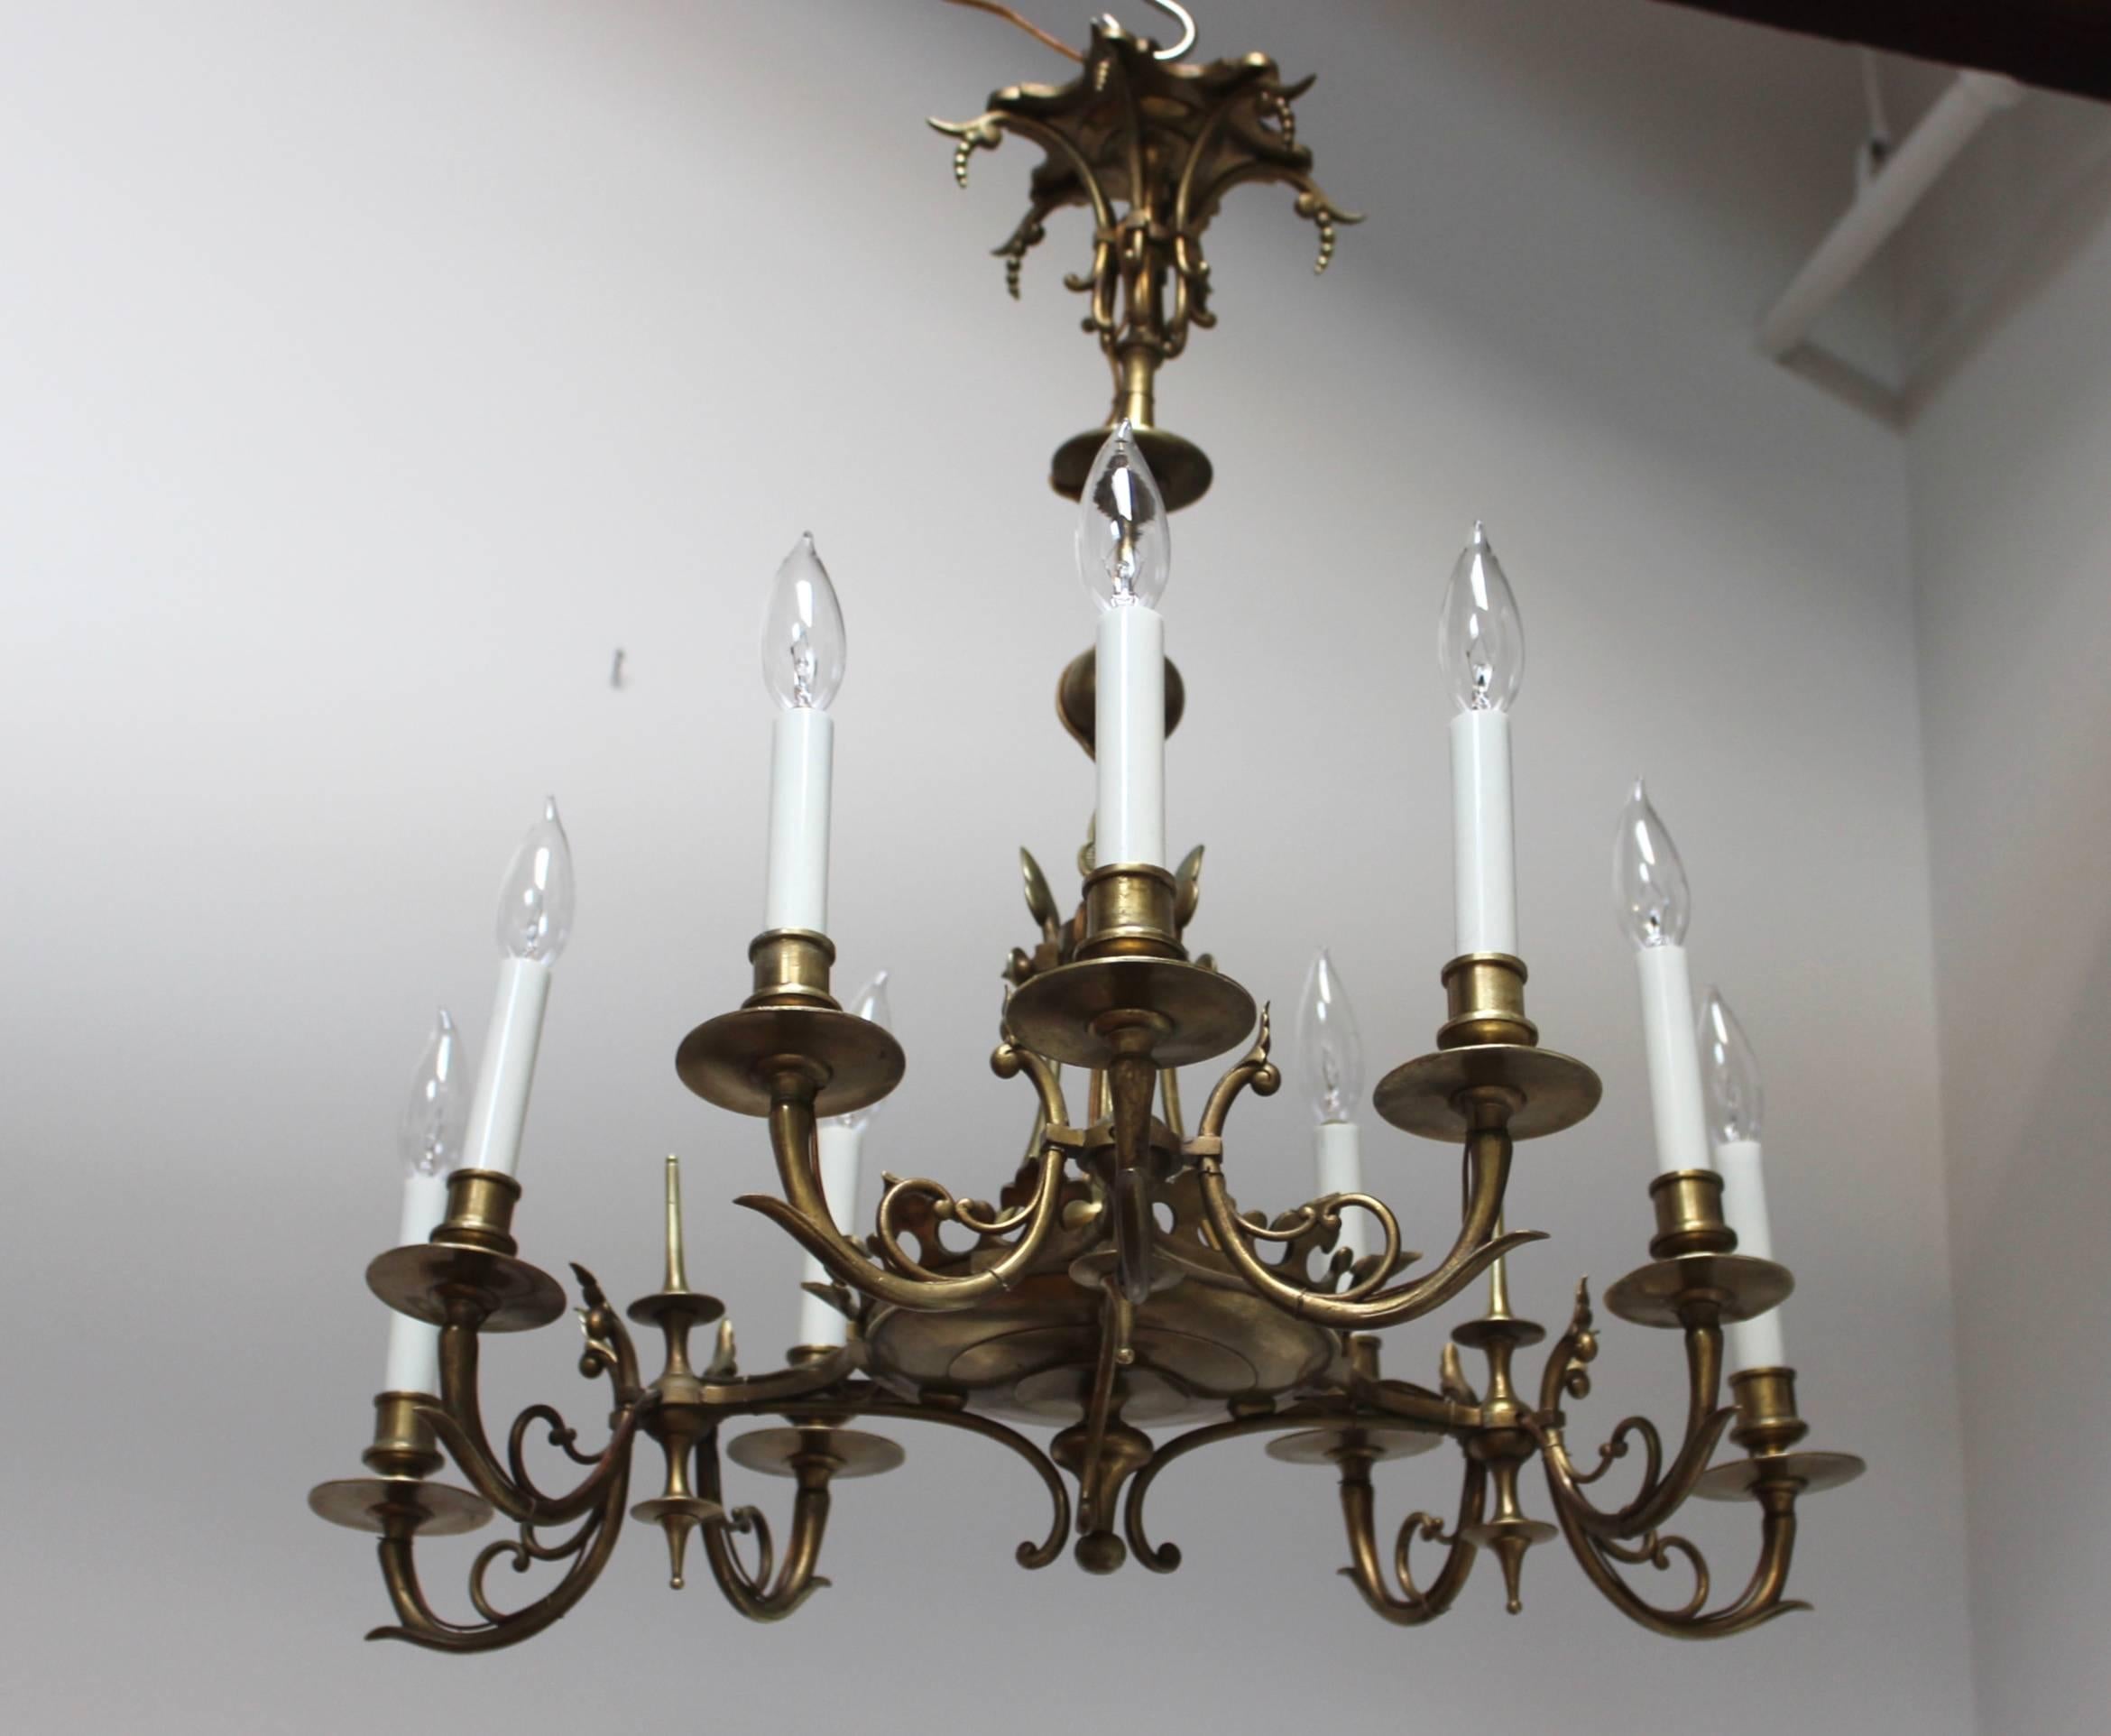 Stunning 1950s French nine lights bronze chandelier, in vintage original condition with minor wear and patina due to age and use.